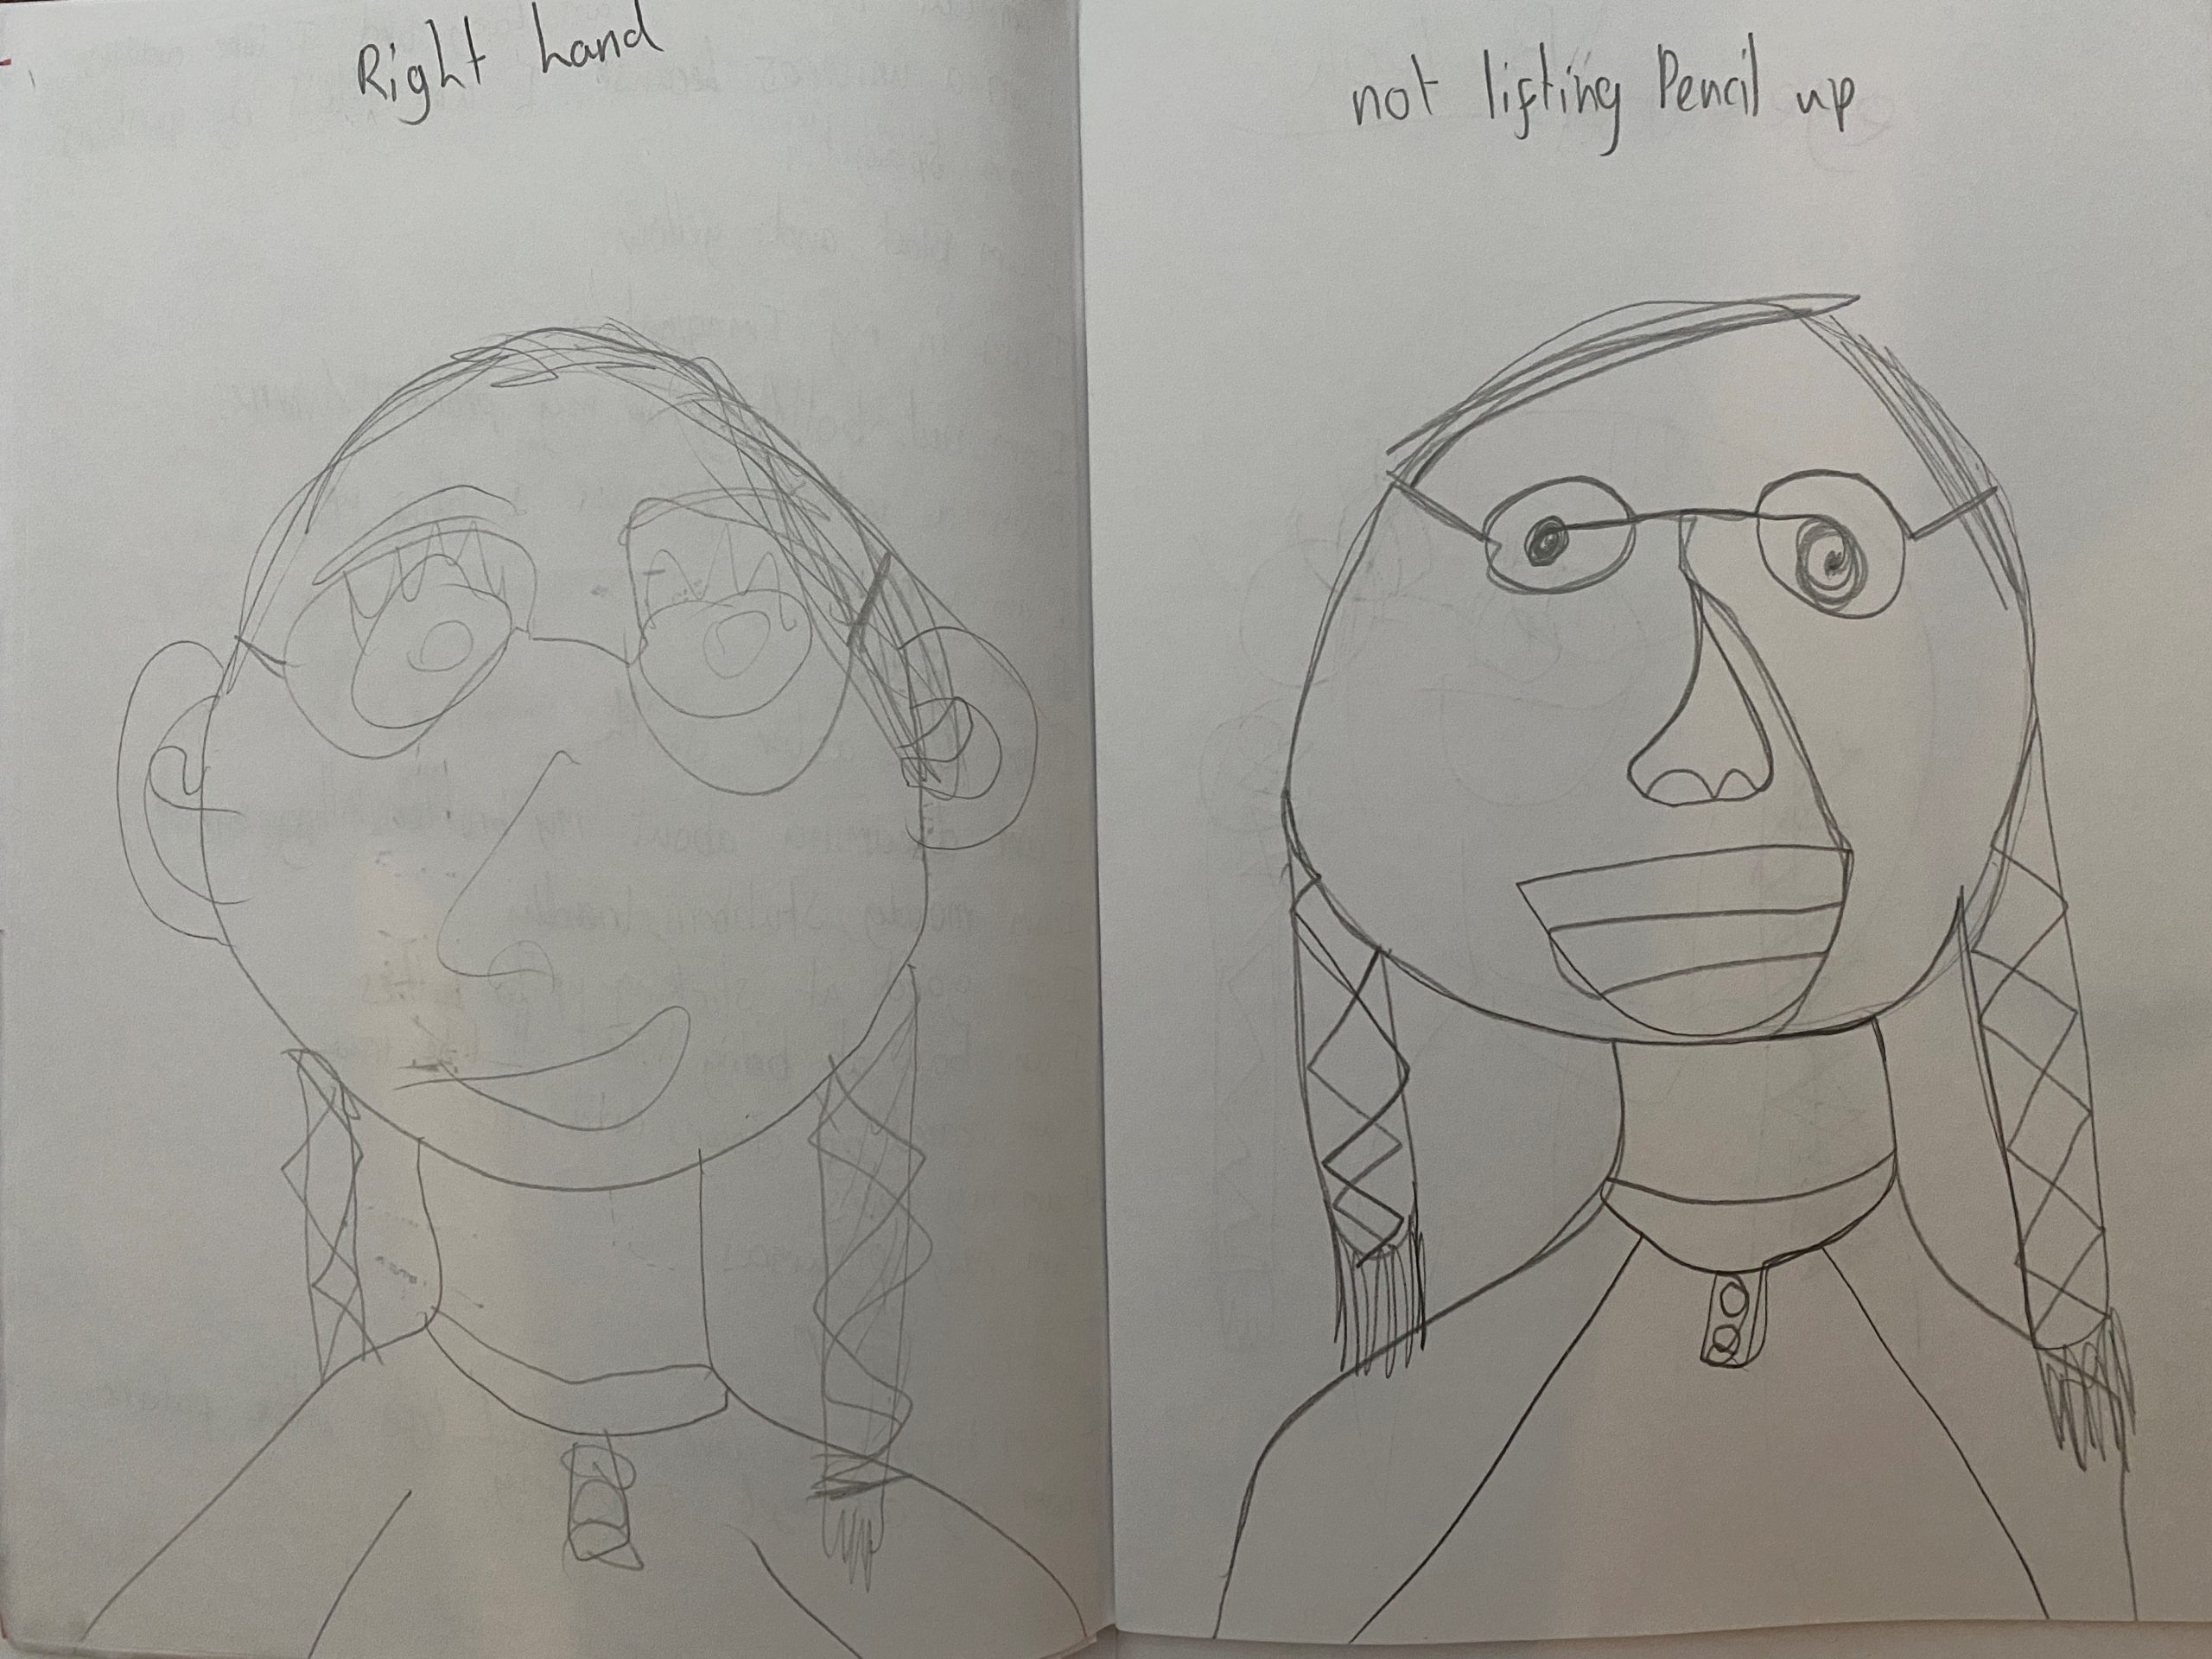 Two self-portraits, one drawn with the right hand, the other without lifting the pencil up